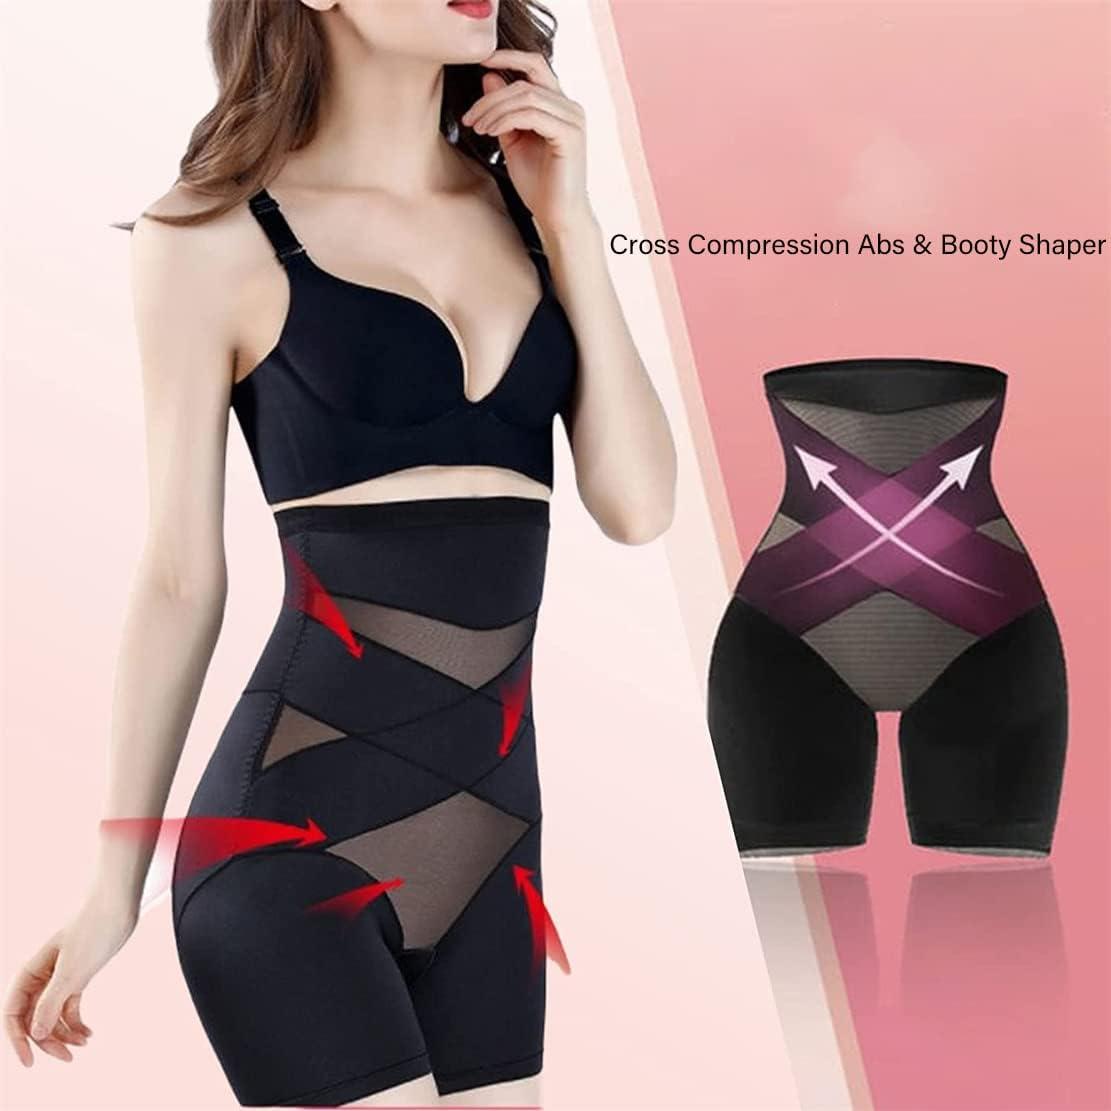 Cross Compression Abs Shaping Pants Booty High Waisted Shaper for